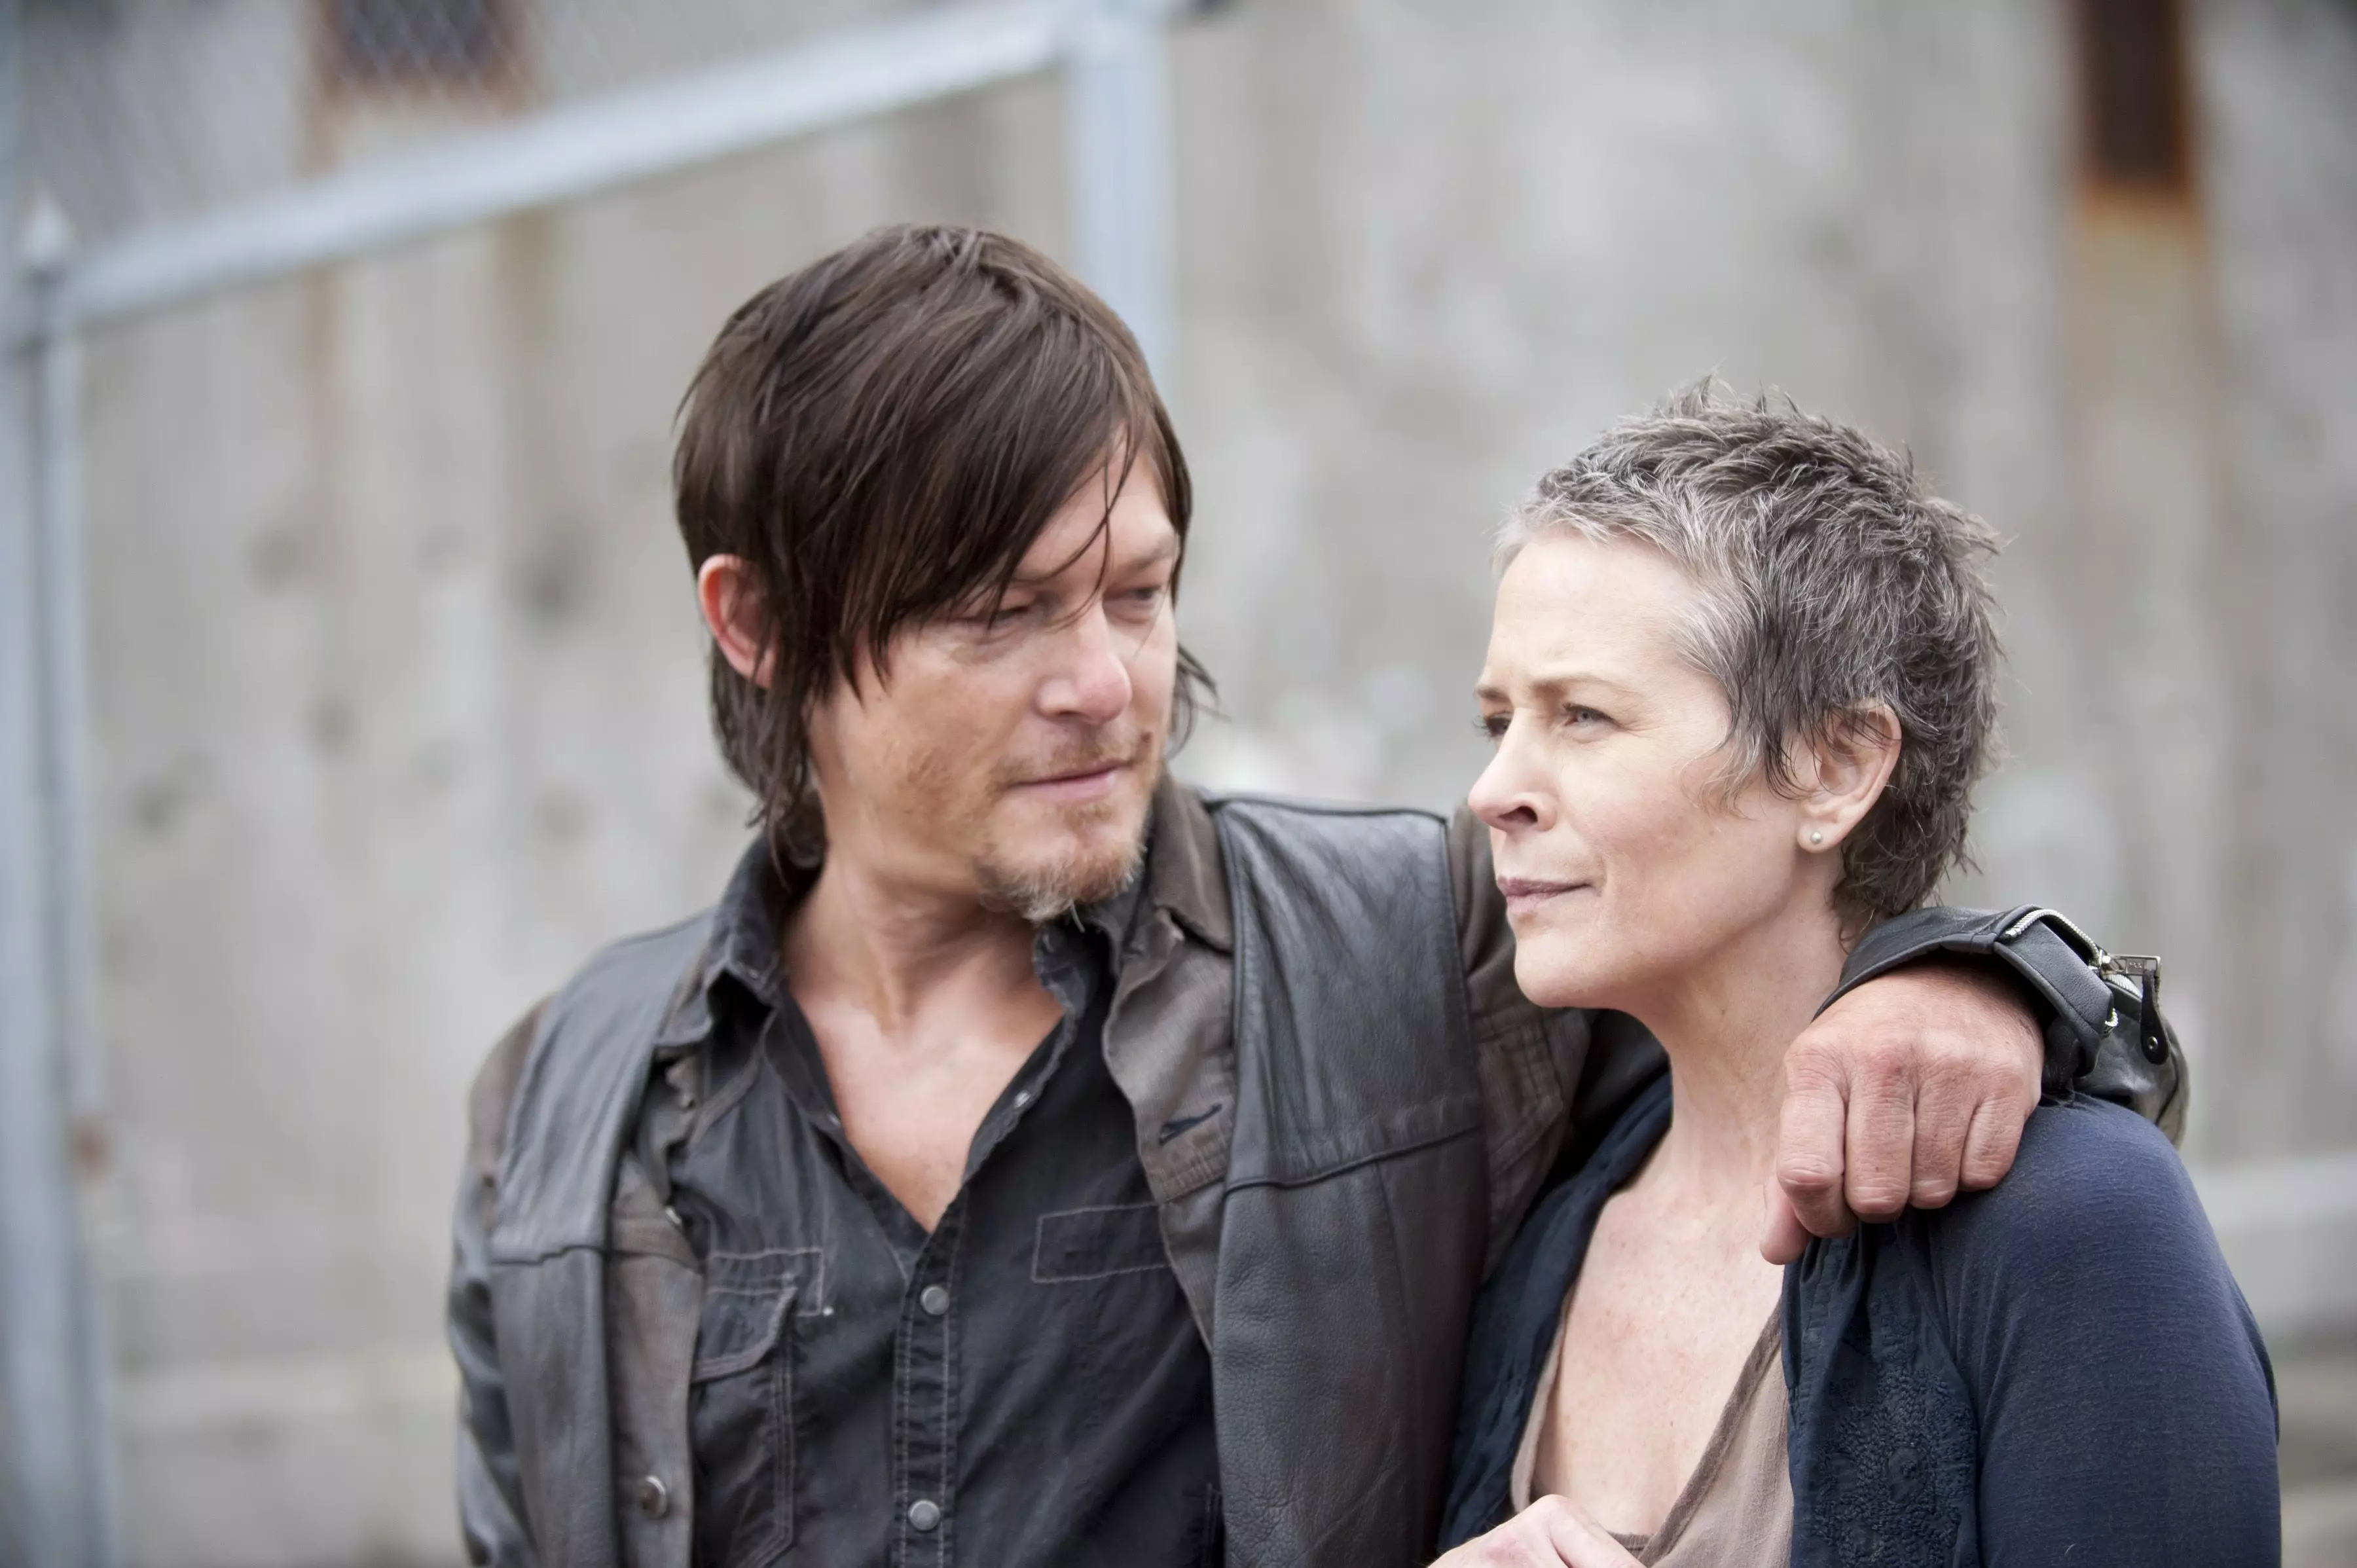 The two favourites Daryl and Carol will star in a spin-off (